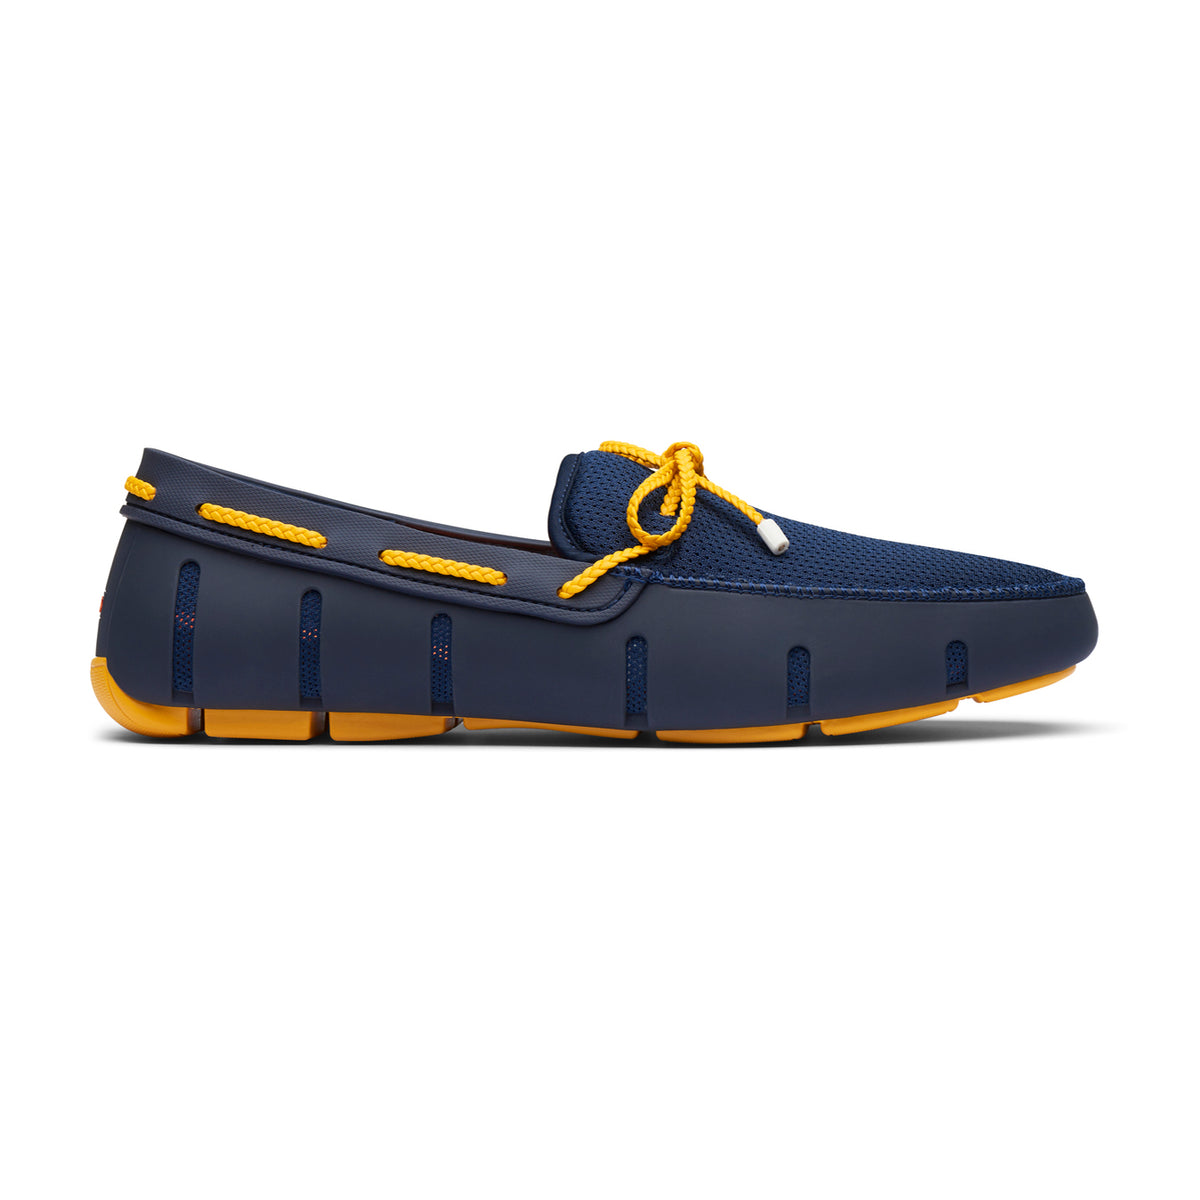 navy and gold loafers